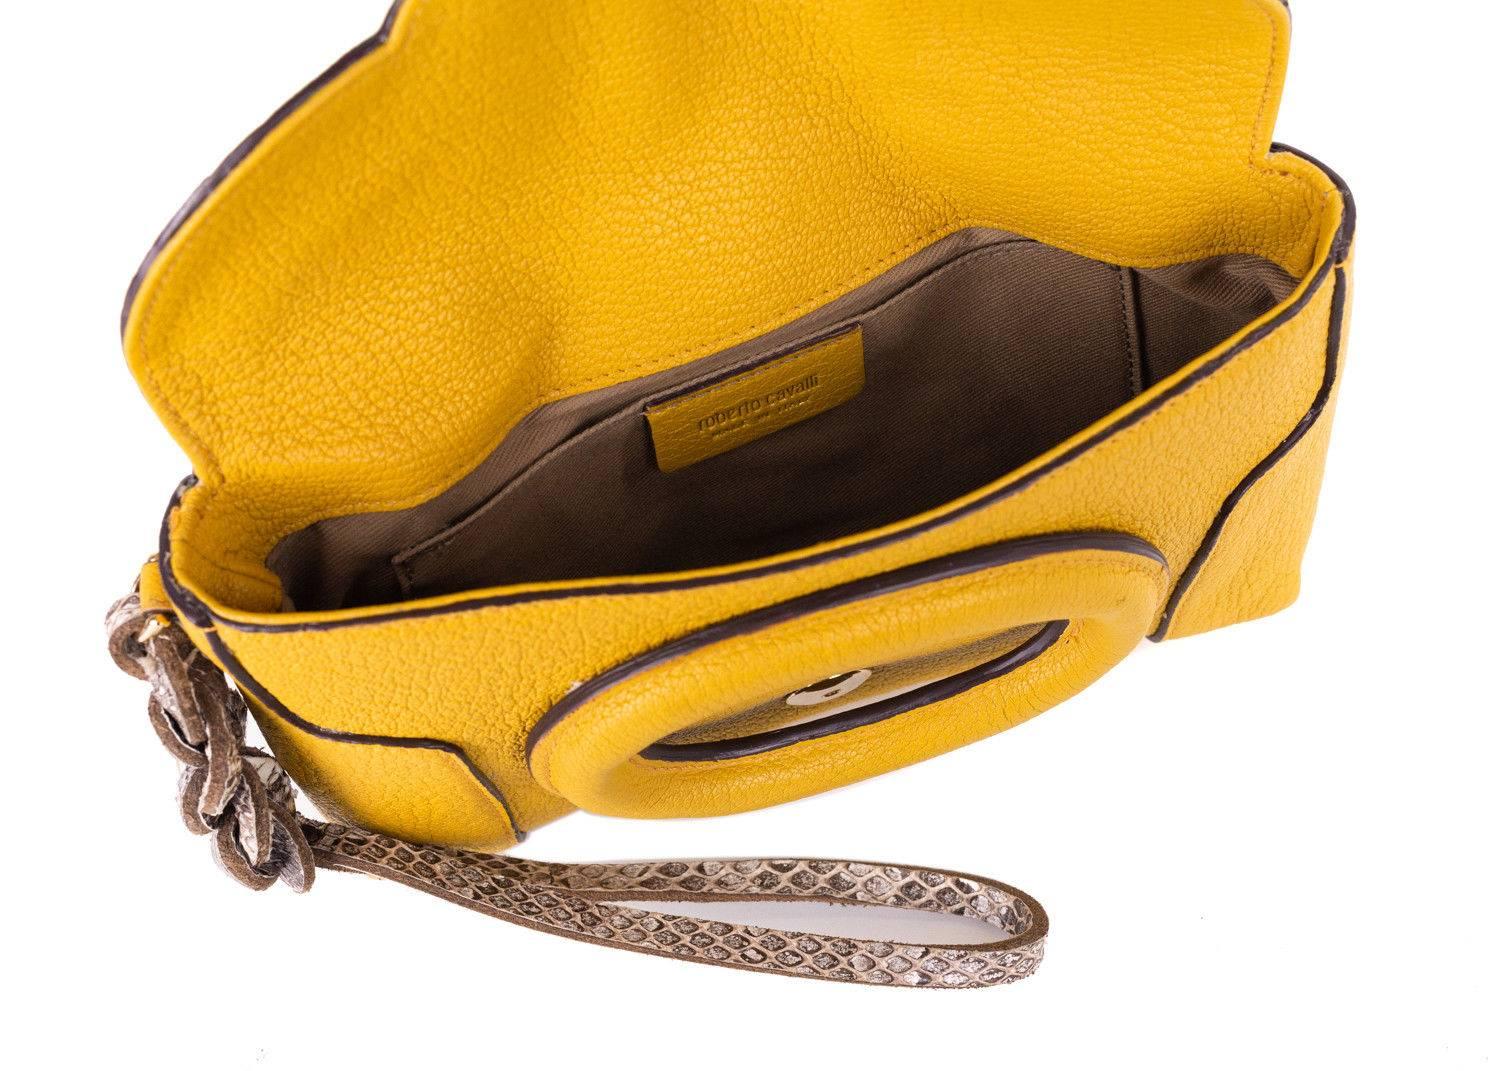 Men's Roberto Cavalli Solid Mustard Yellow Grained Leather Wristlet Clutch For Sale